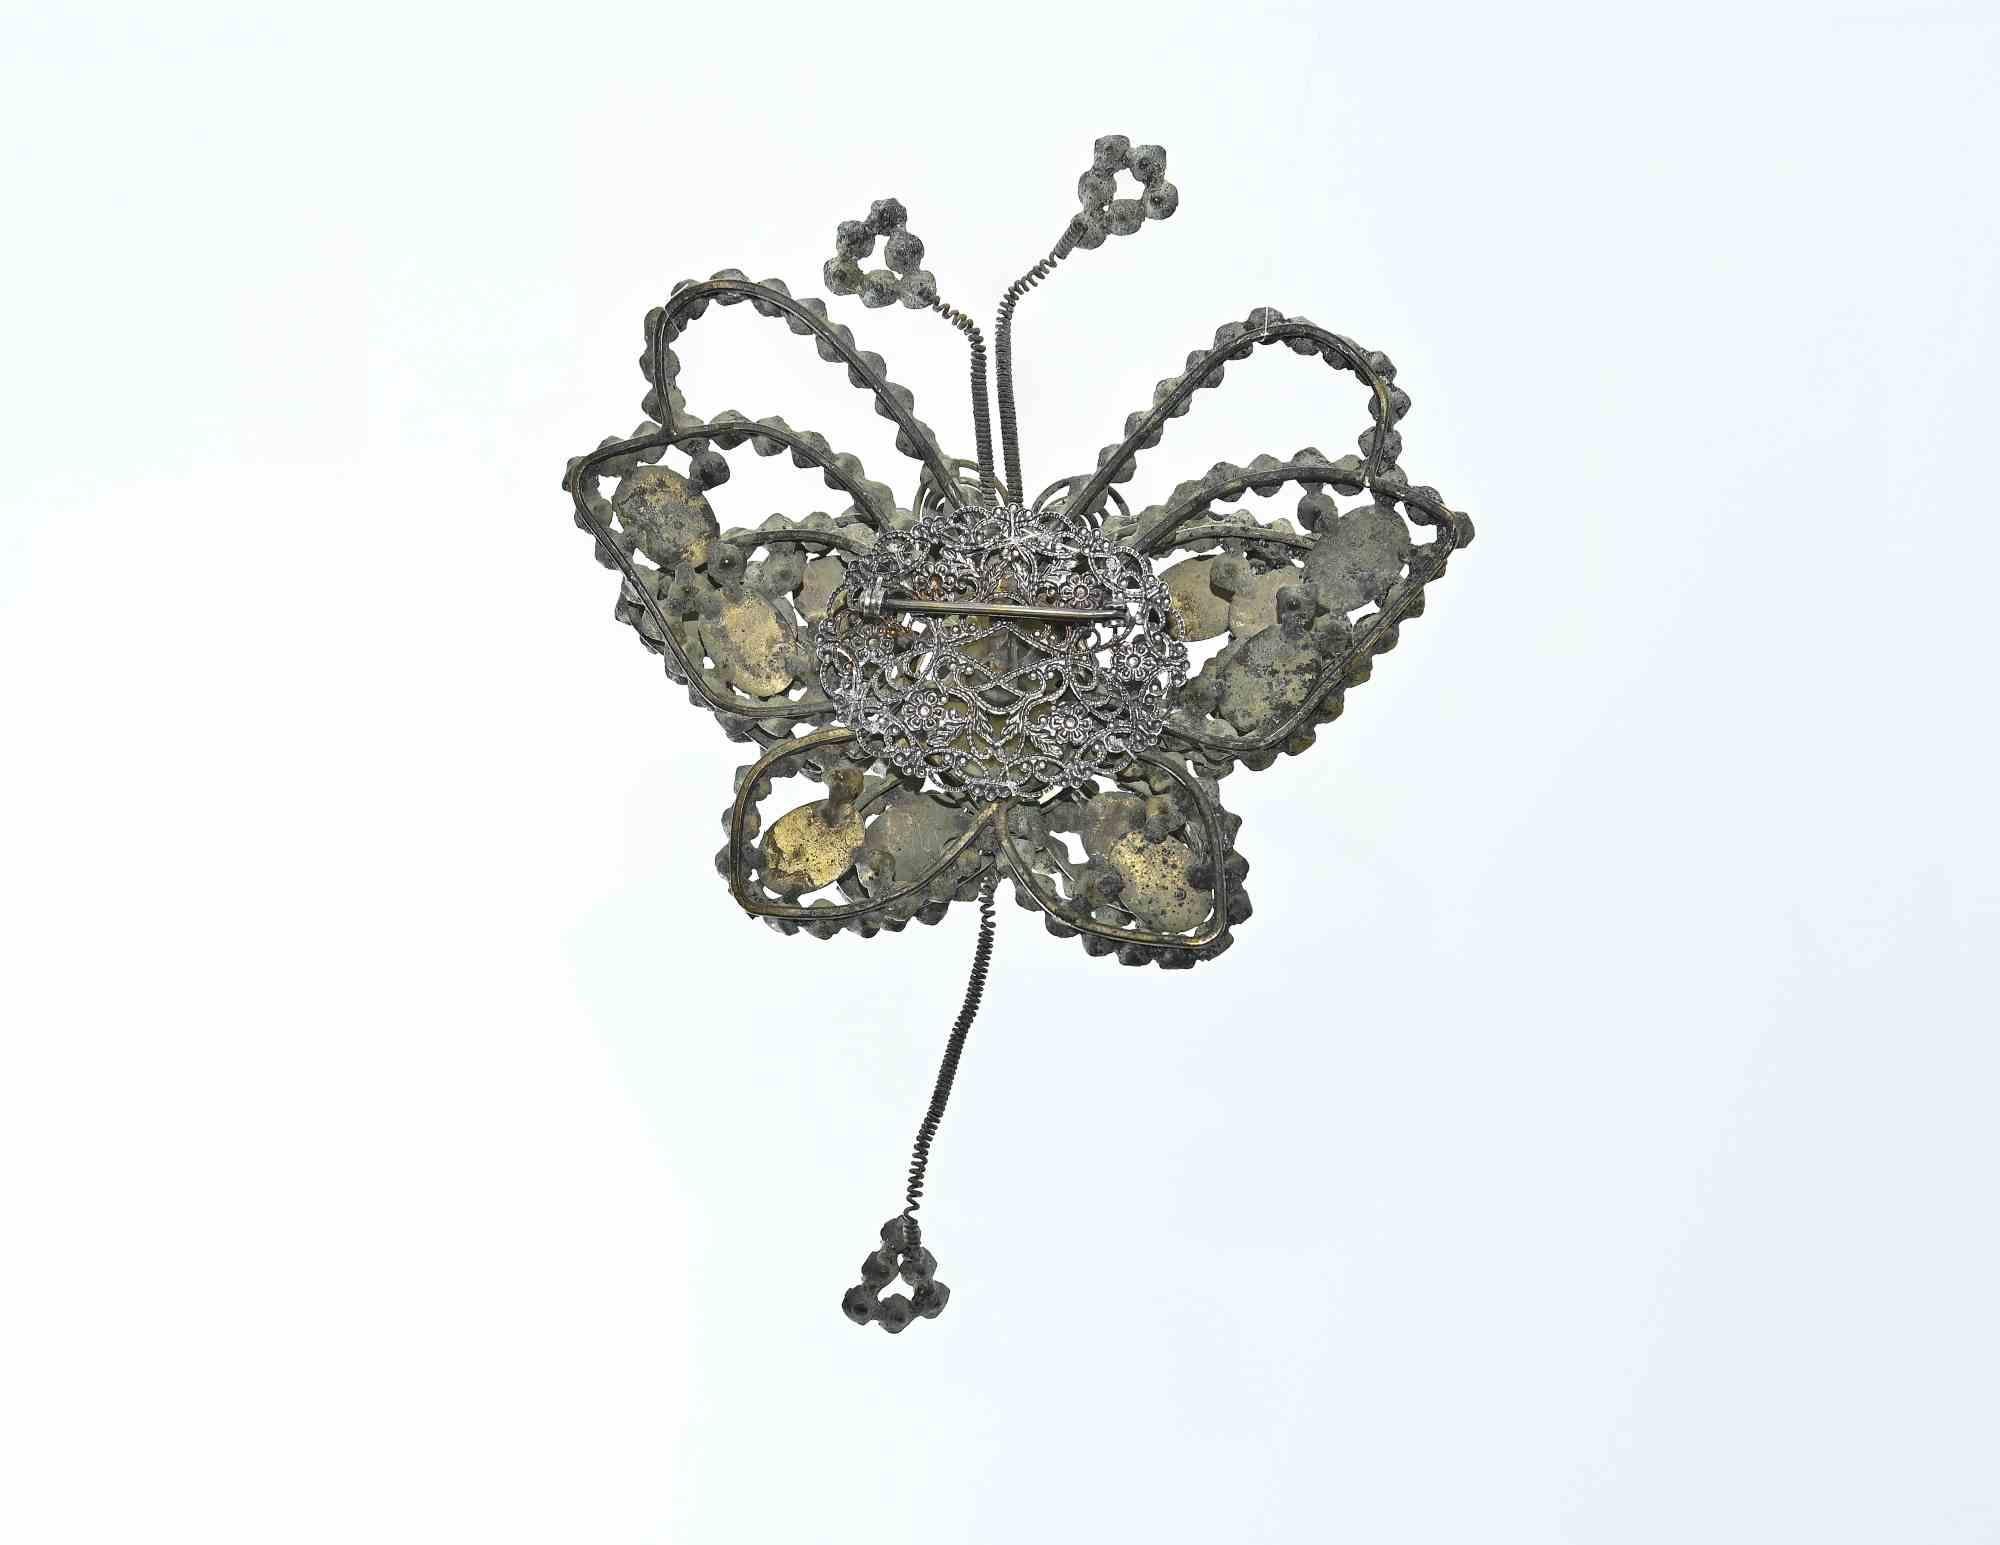 Butterfly-shaped brooch is a handmade object realized in the 1930s.

Craftmanship, 17 x 12 cm.   

Some stones are missing and the iron is ruined due to age.

Vintage collectible item.  

